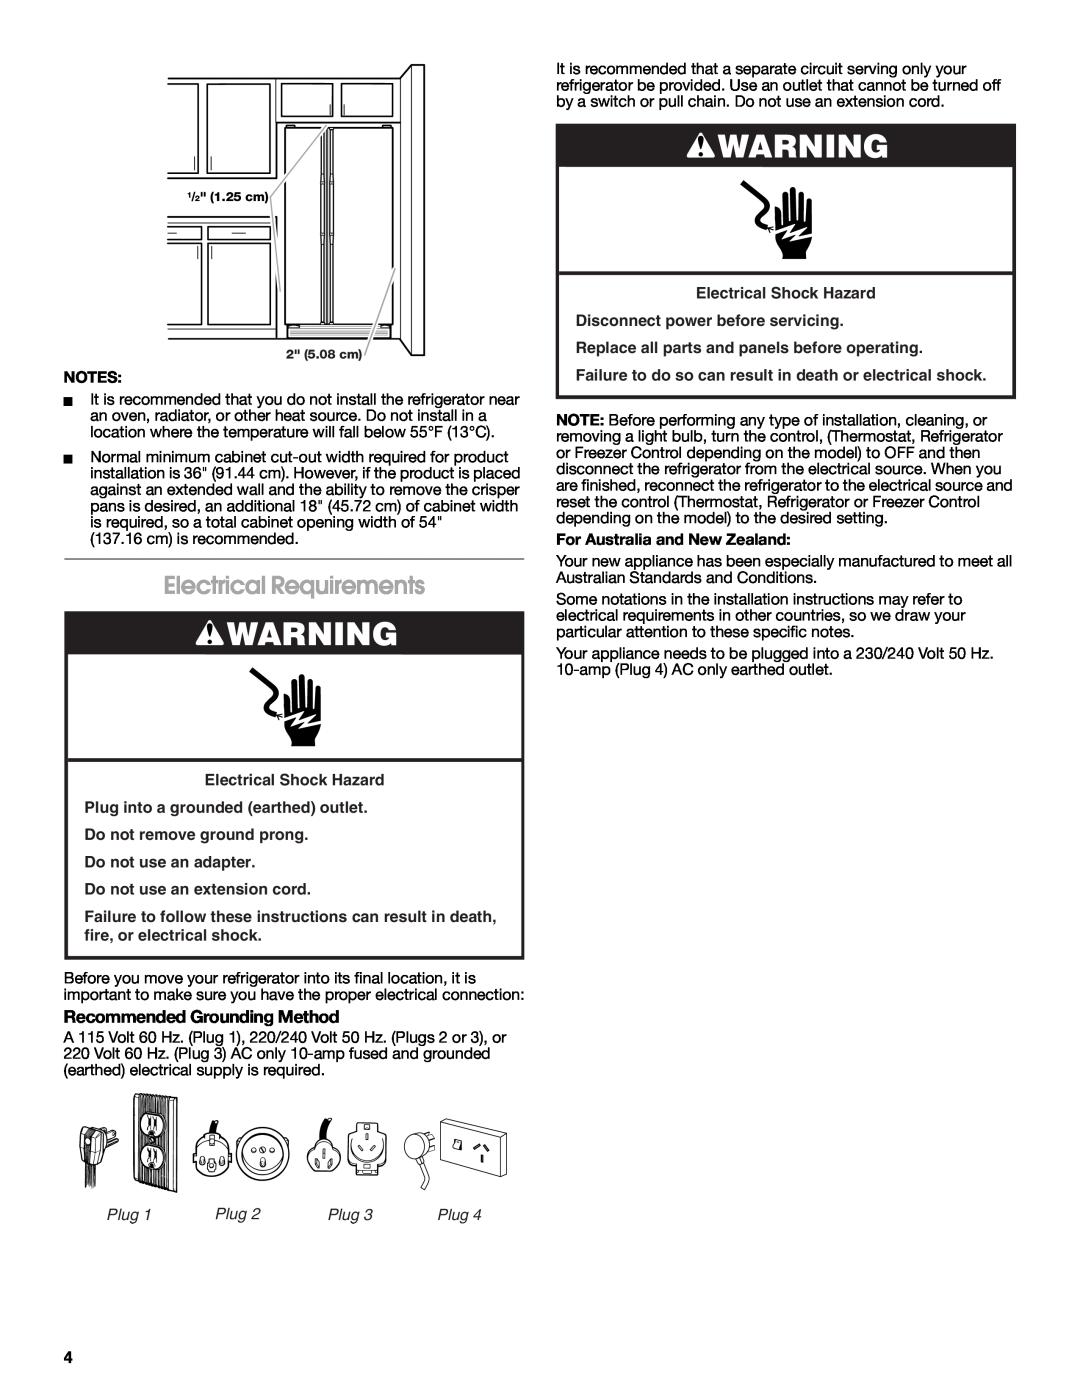 Whirlpool W10266784A manual Electrical Requirements, Recommended Grounding Method, Do not use an extension cord, Plug 